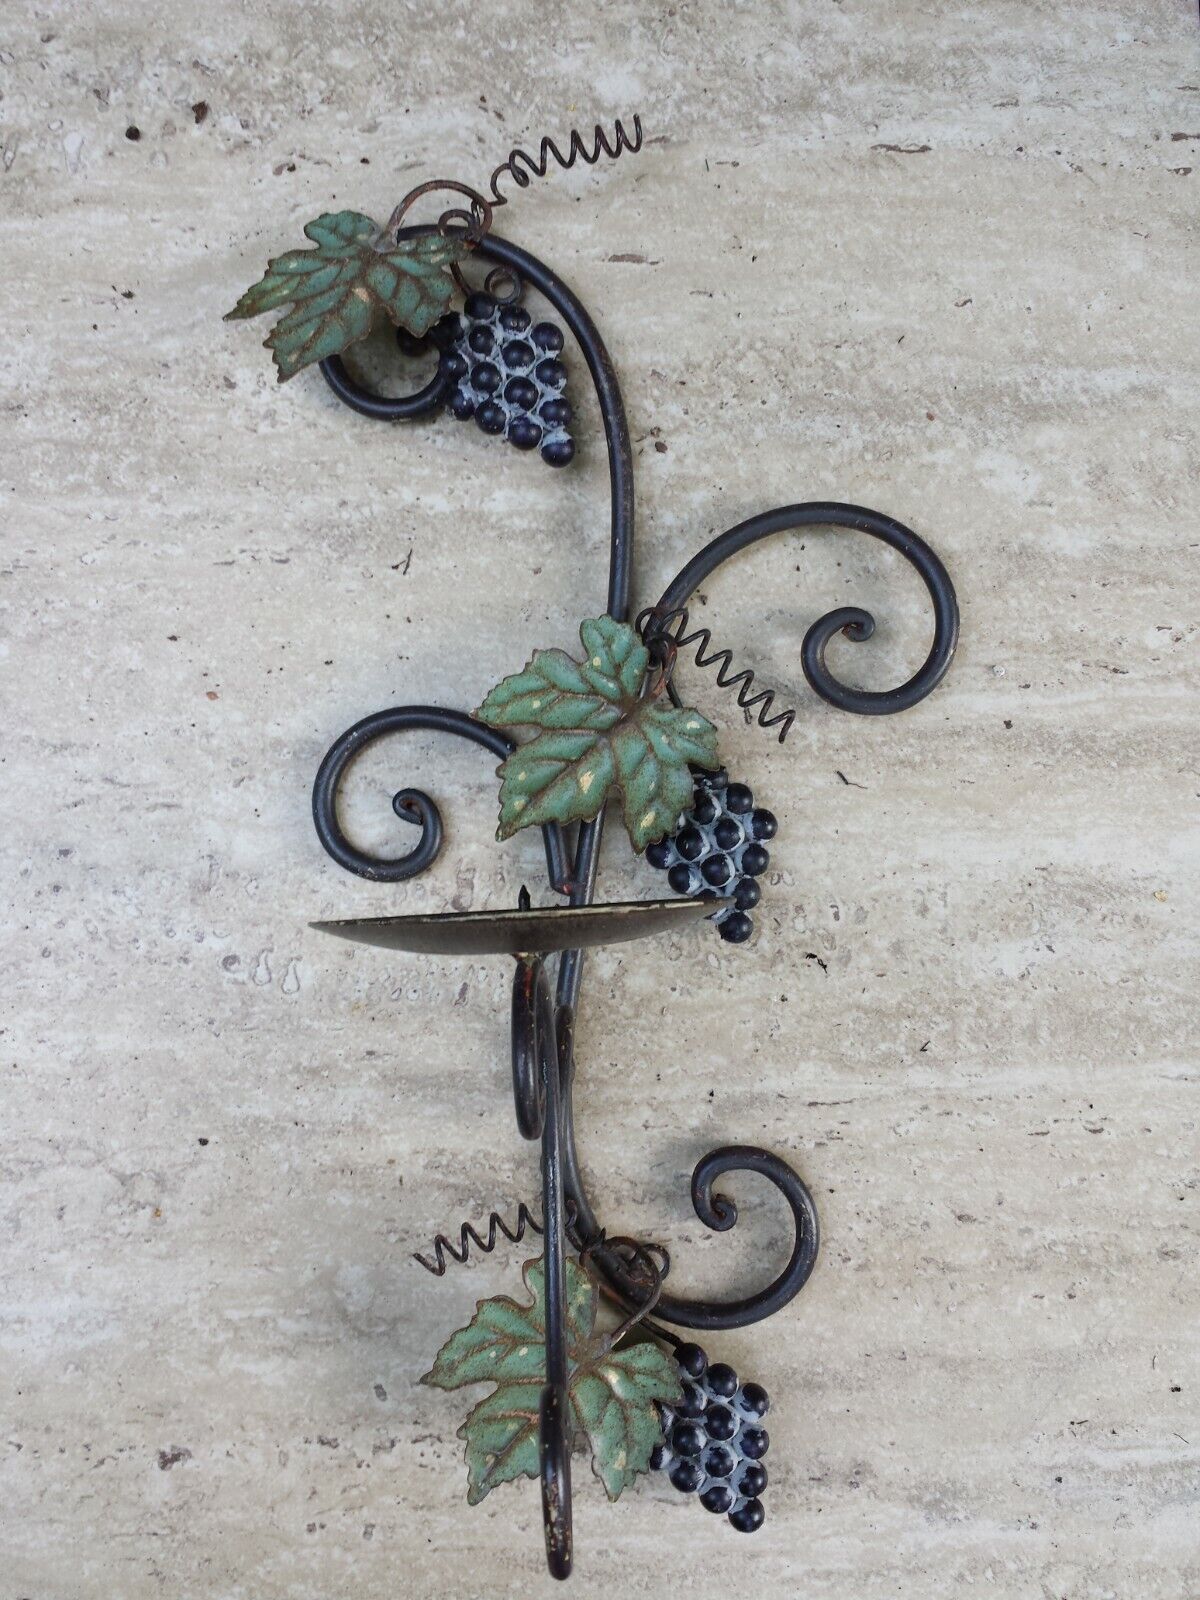 Vintage Metal Sconce Candle Holder Wall set of two gift Home Decor